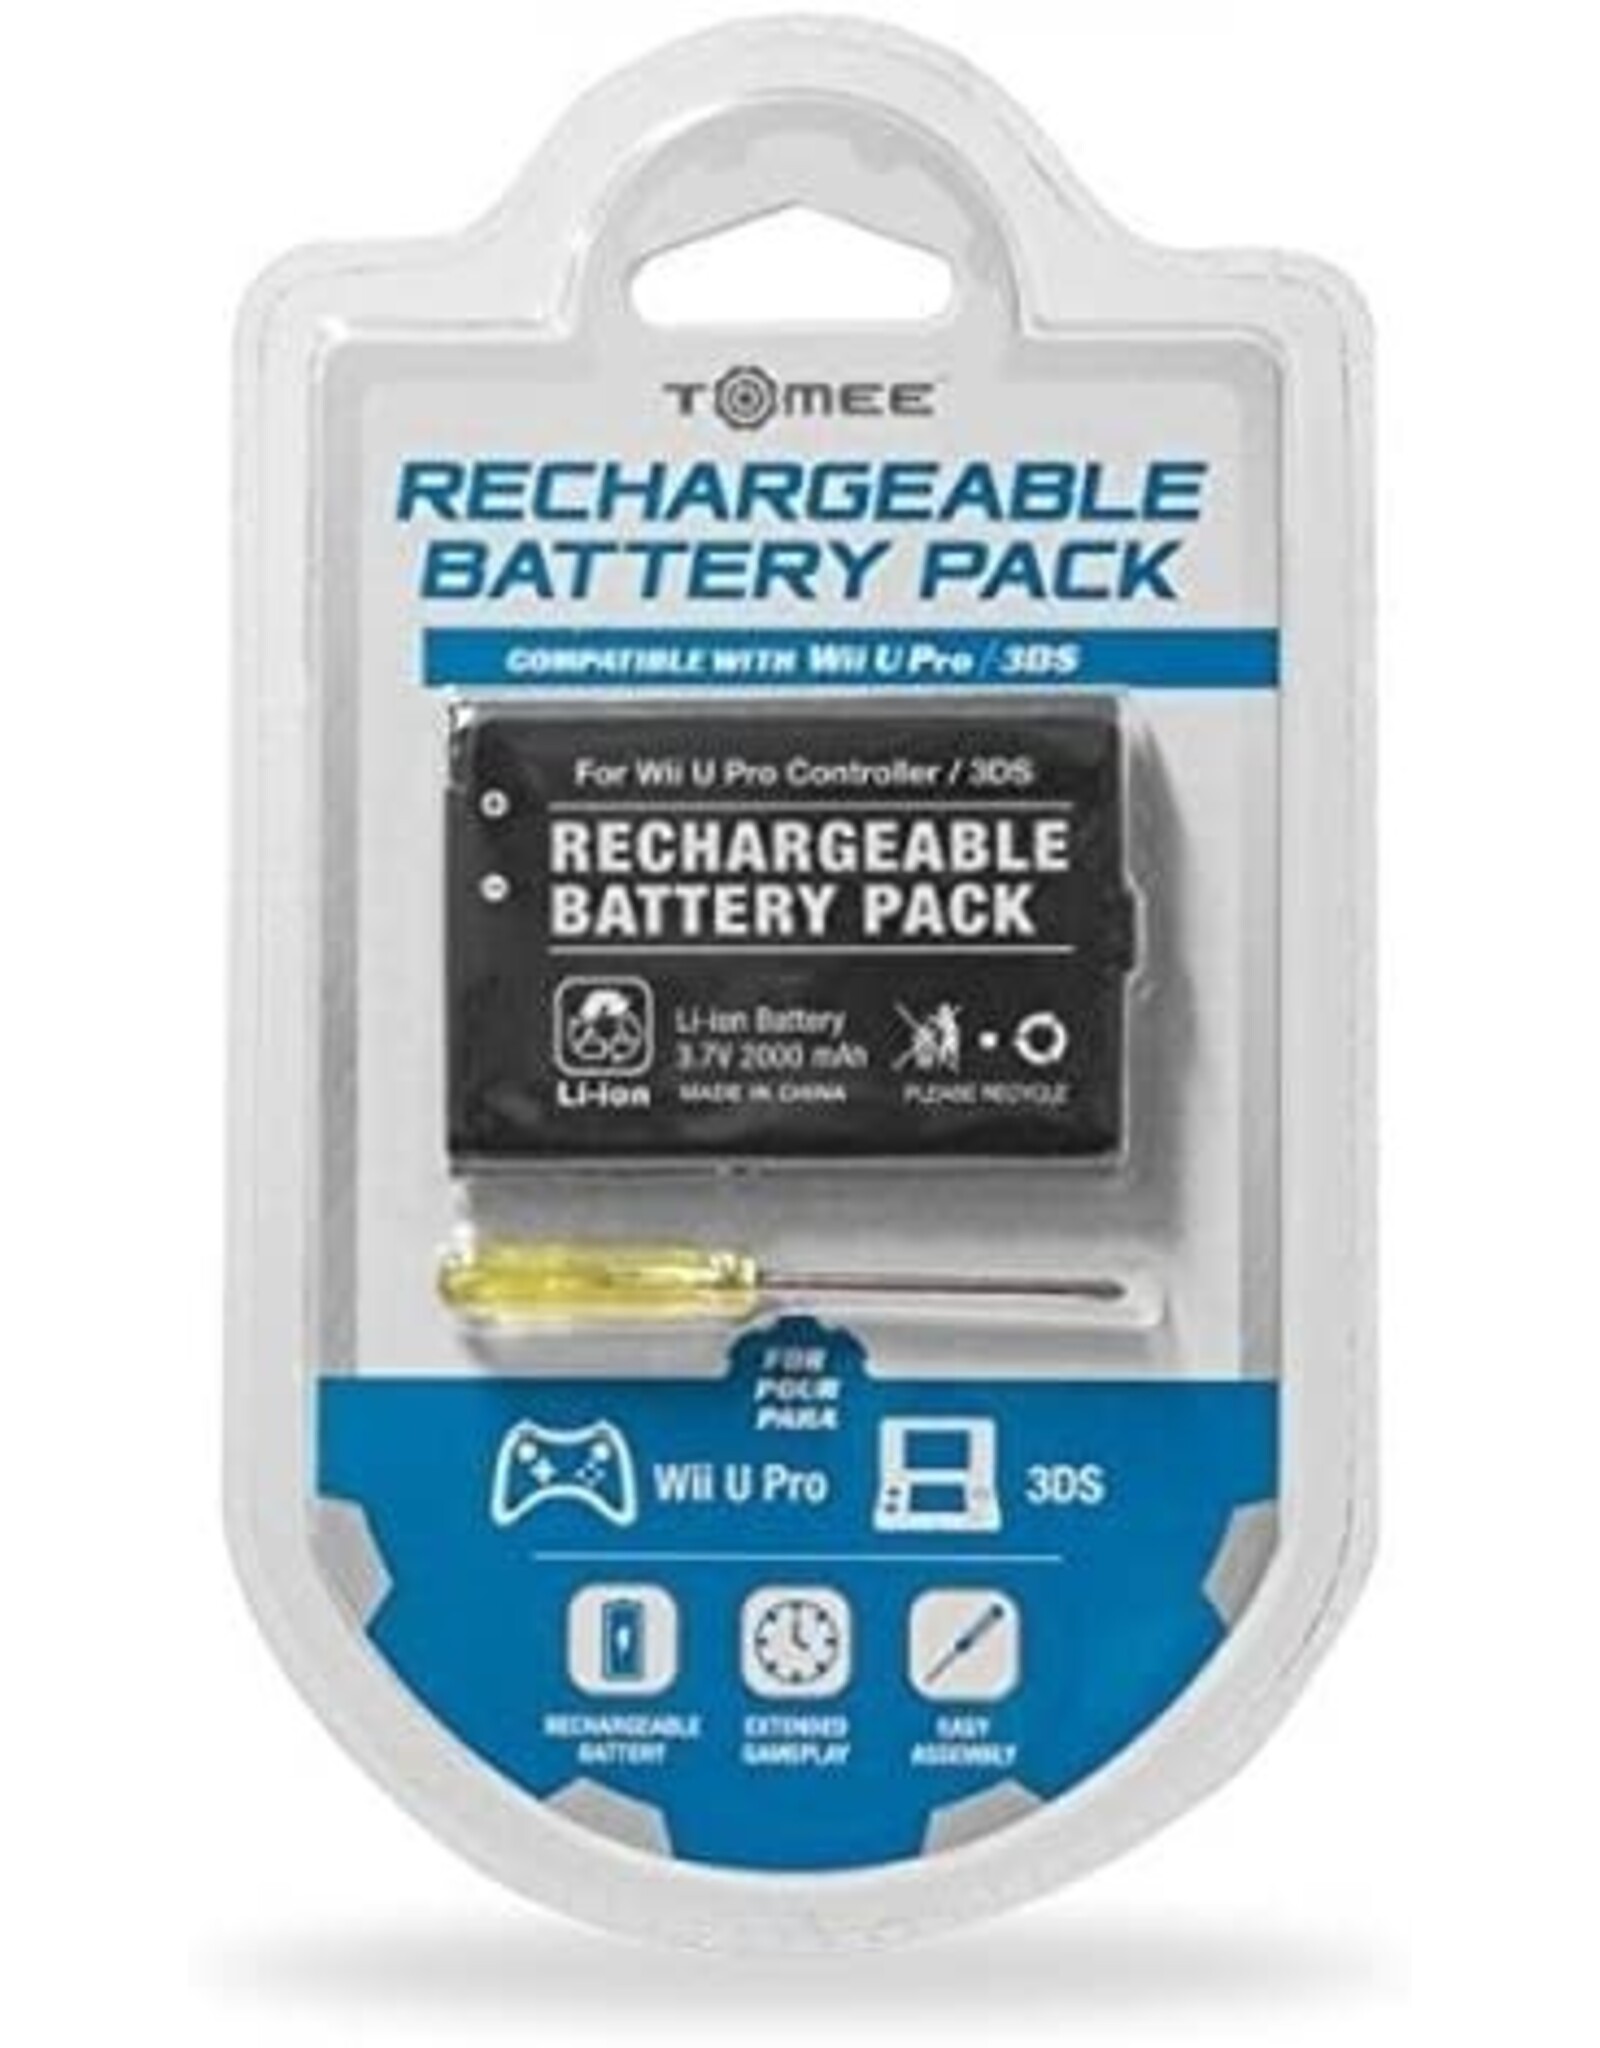 Nintendo DS Nintendo 3DS Wii U Pro Controller Replacement Battery - Tomee (Brand New)